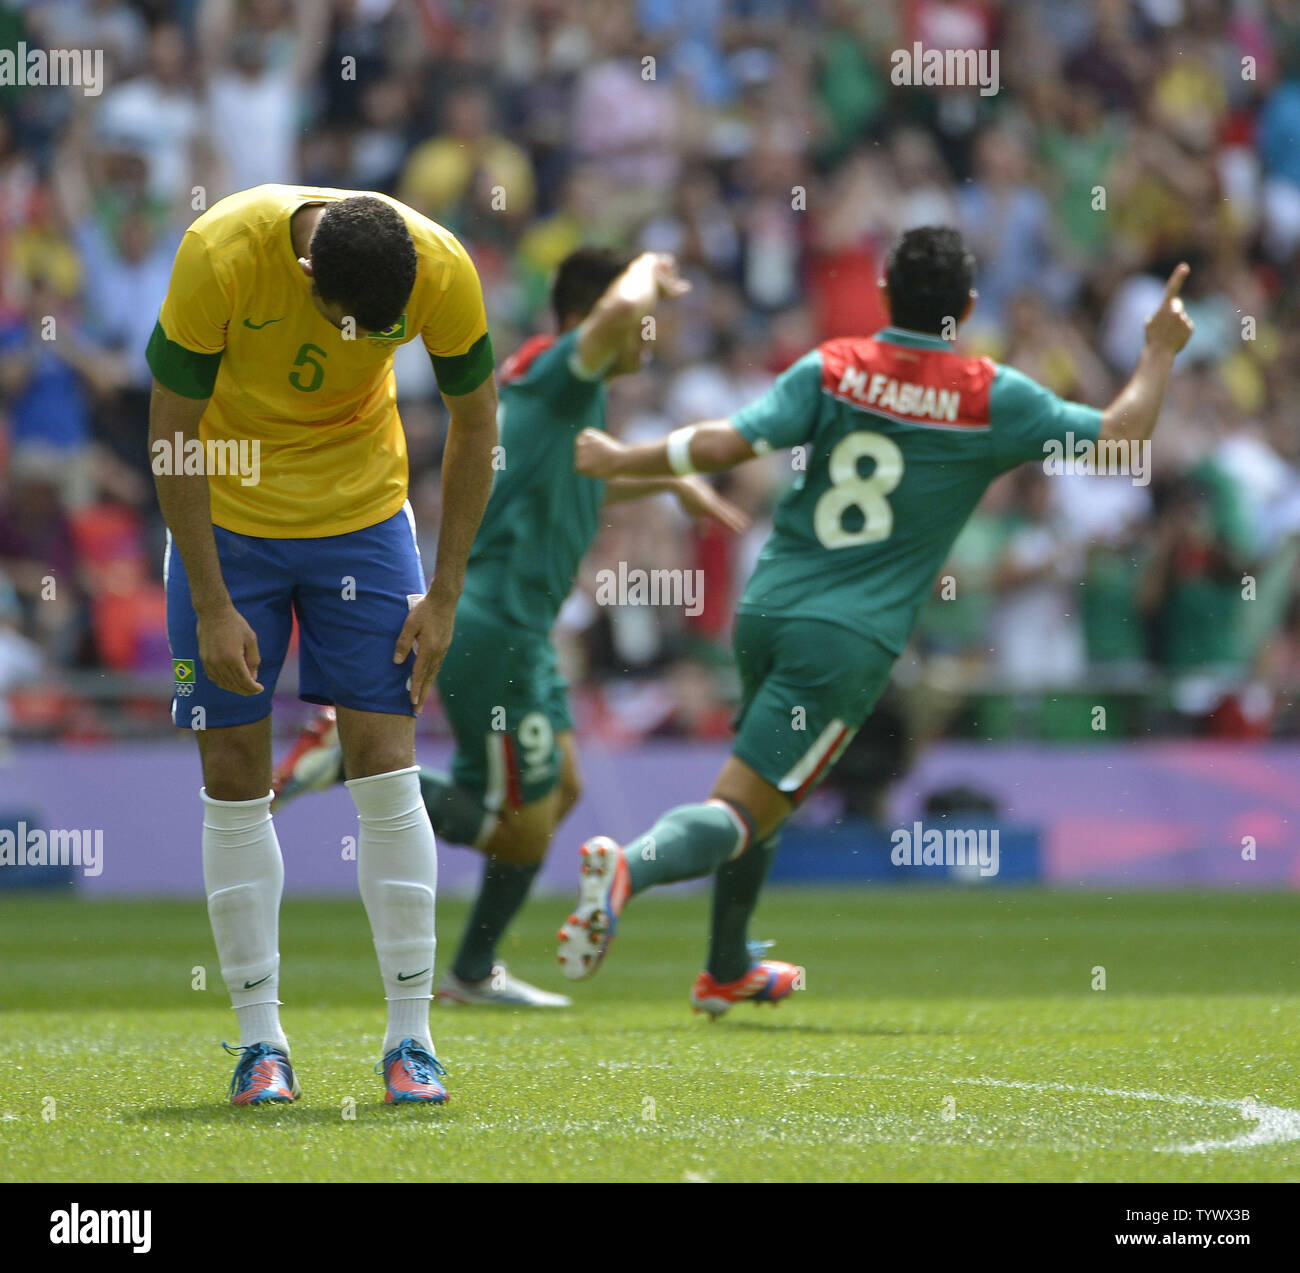 Sandro of Brazil (L) reacts as Oribe Peralta (C) and Marco Fabian of Mexico celebrate Peralta's goal during the first half of the Gold Medal Football Match at the London 2012 Summer Olympics on August 11, 2012 at Wembley Stadium, London.      UPI/Brian Kersey Stock Photo